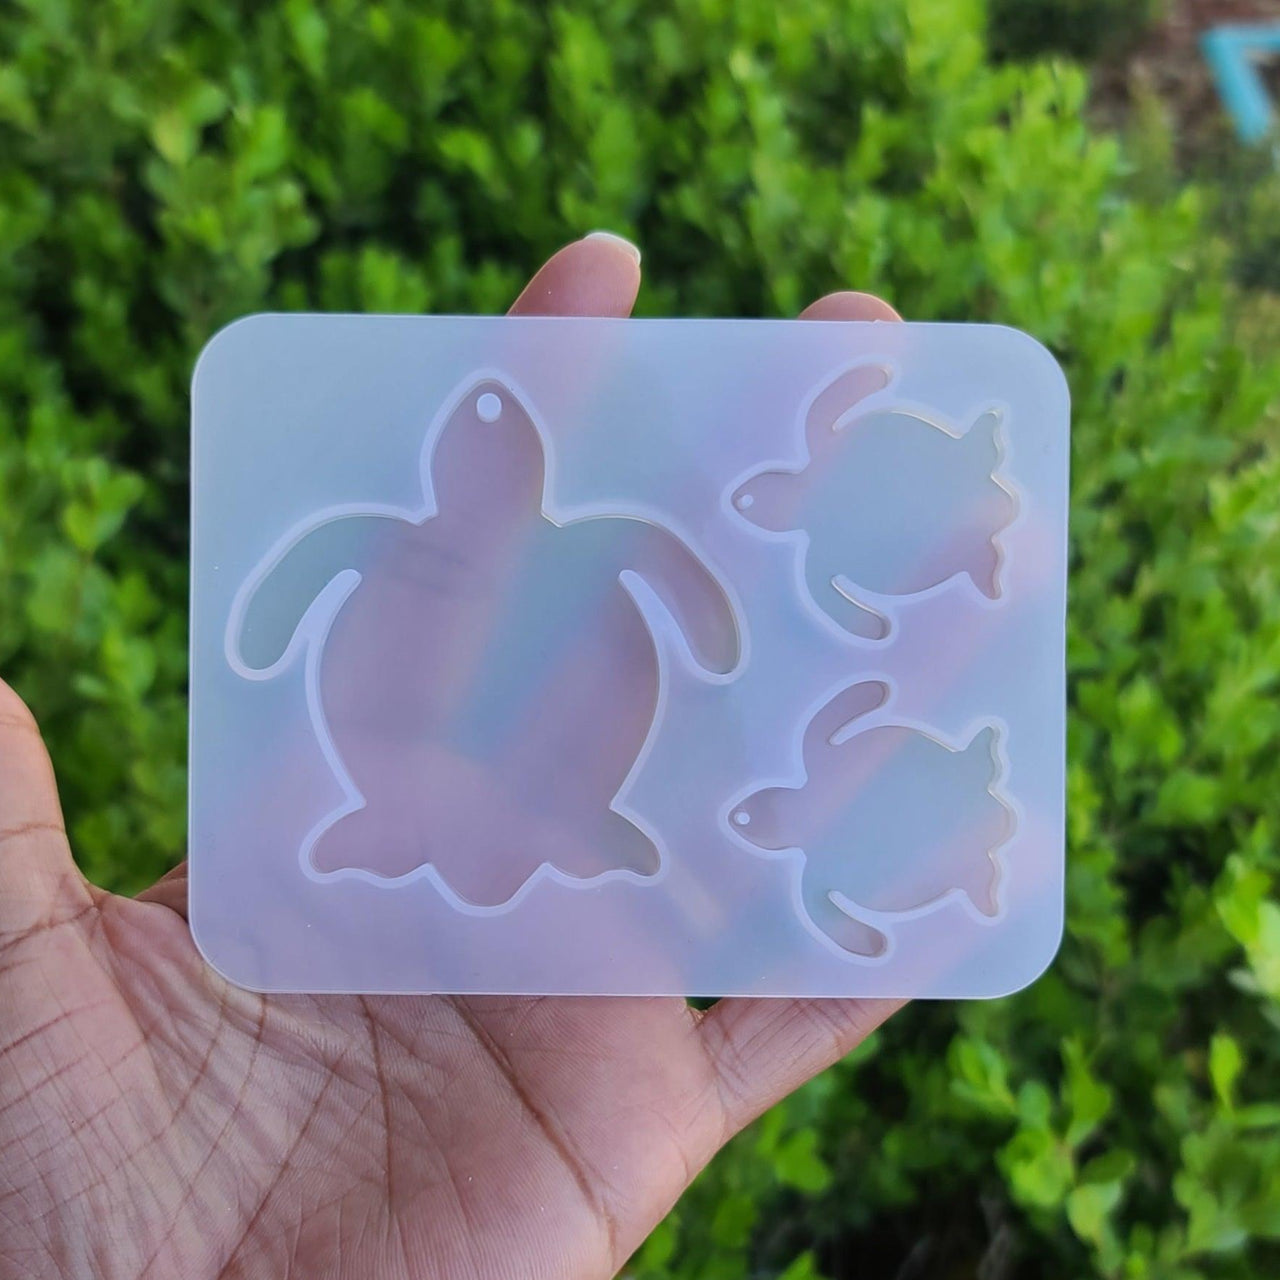 Turtle Mold for Keychain / Resin Silicone Mold / Turtle Silicone Mold